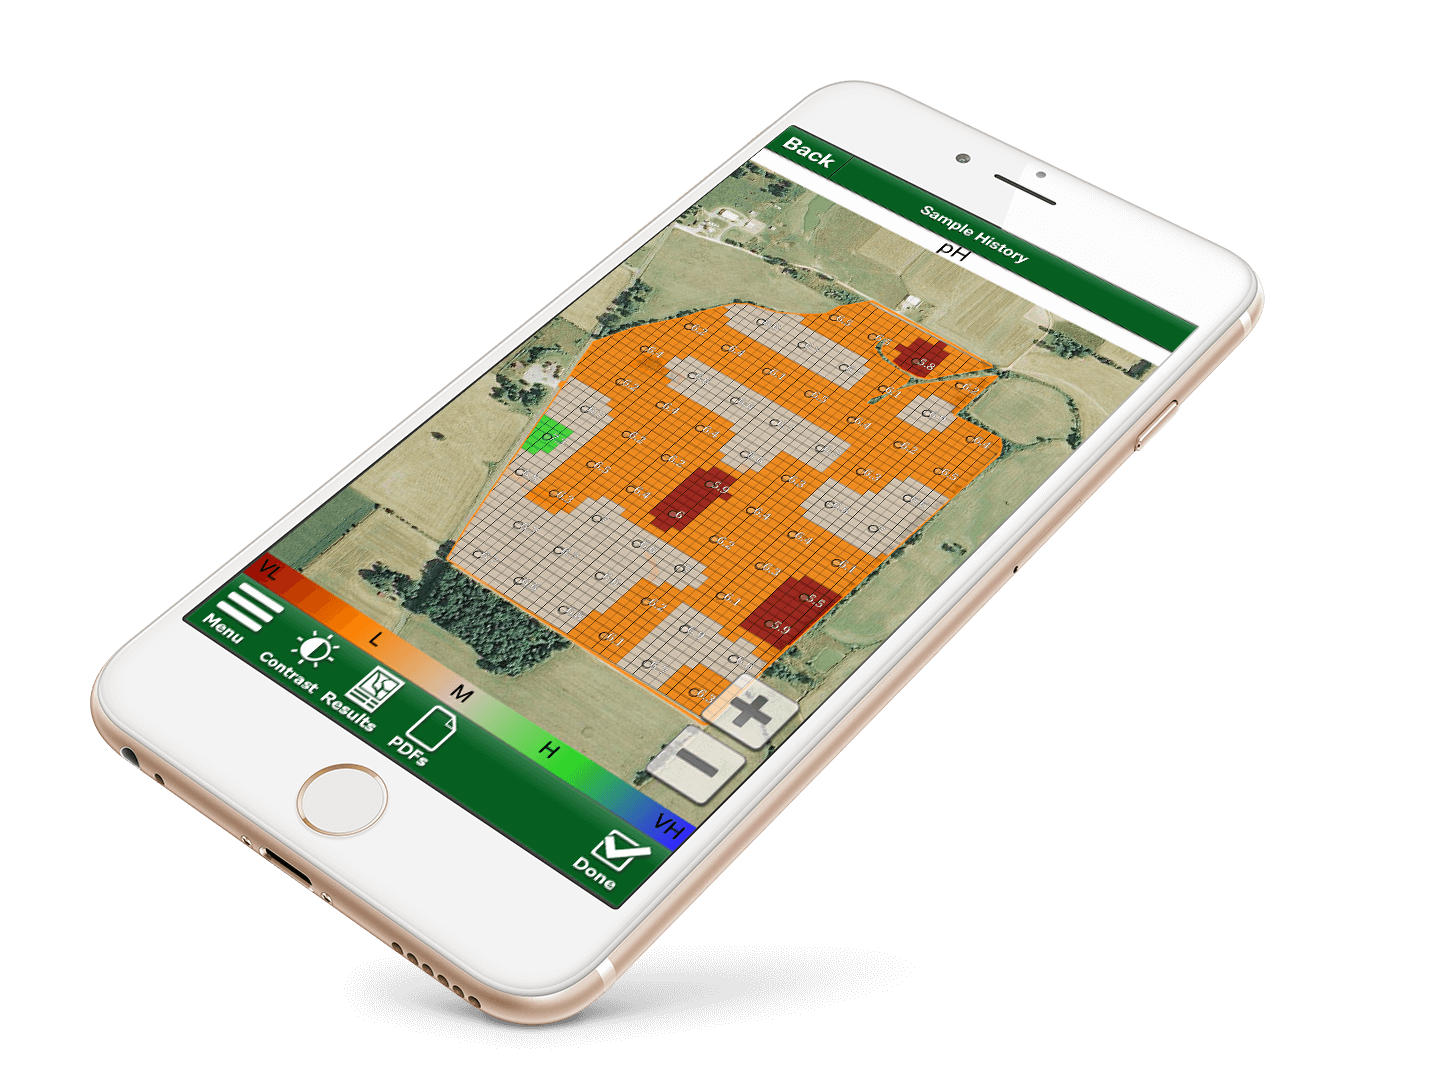 Soil Test Pro's precision soil sampling solution helps take the guesswork out of the seed selection